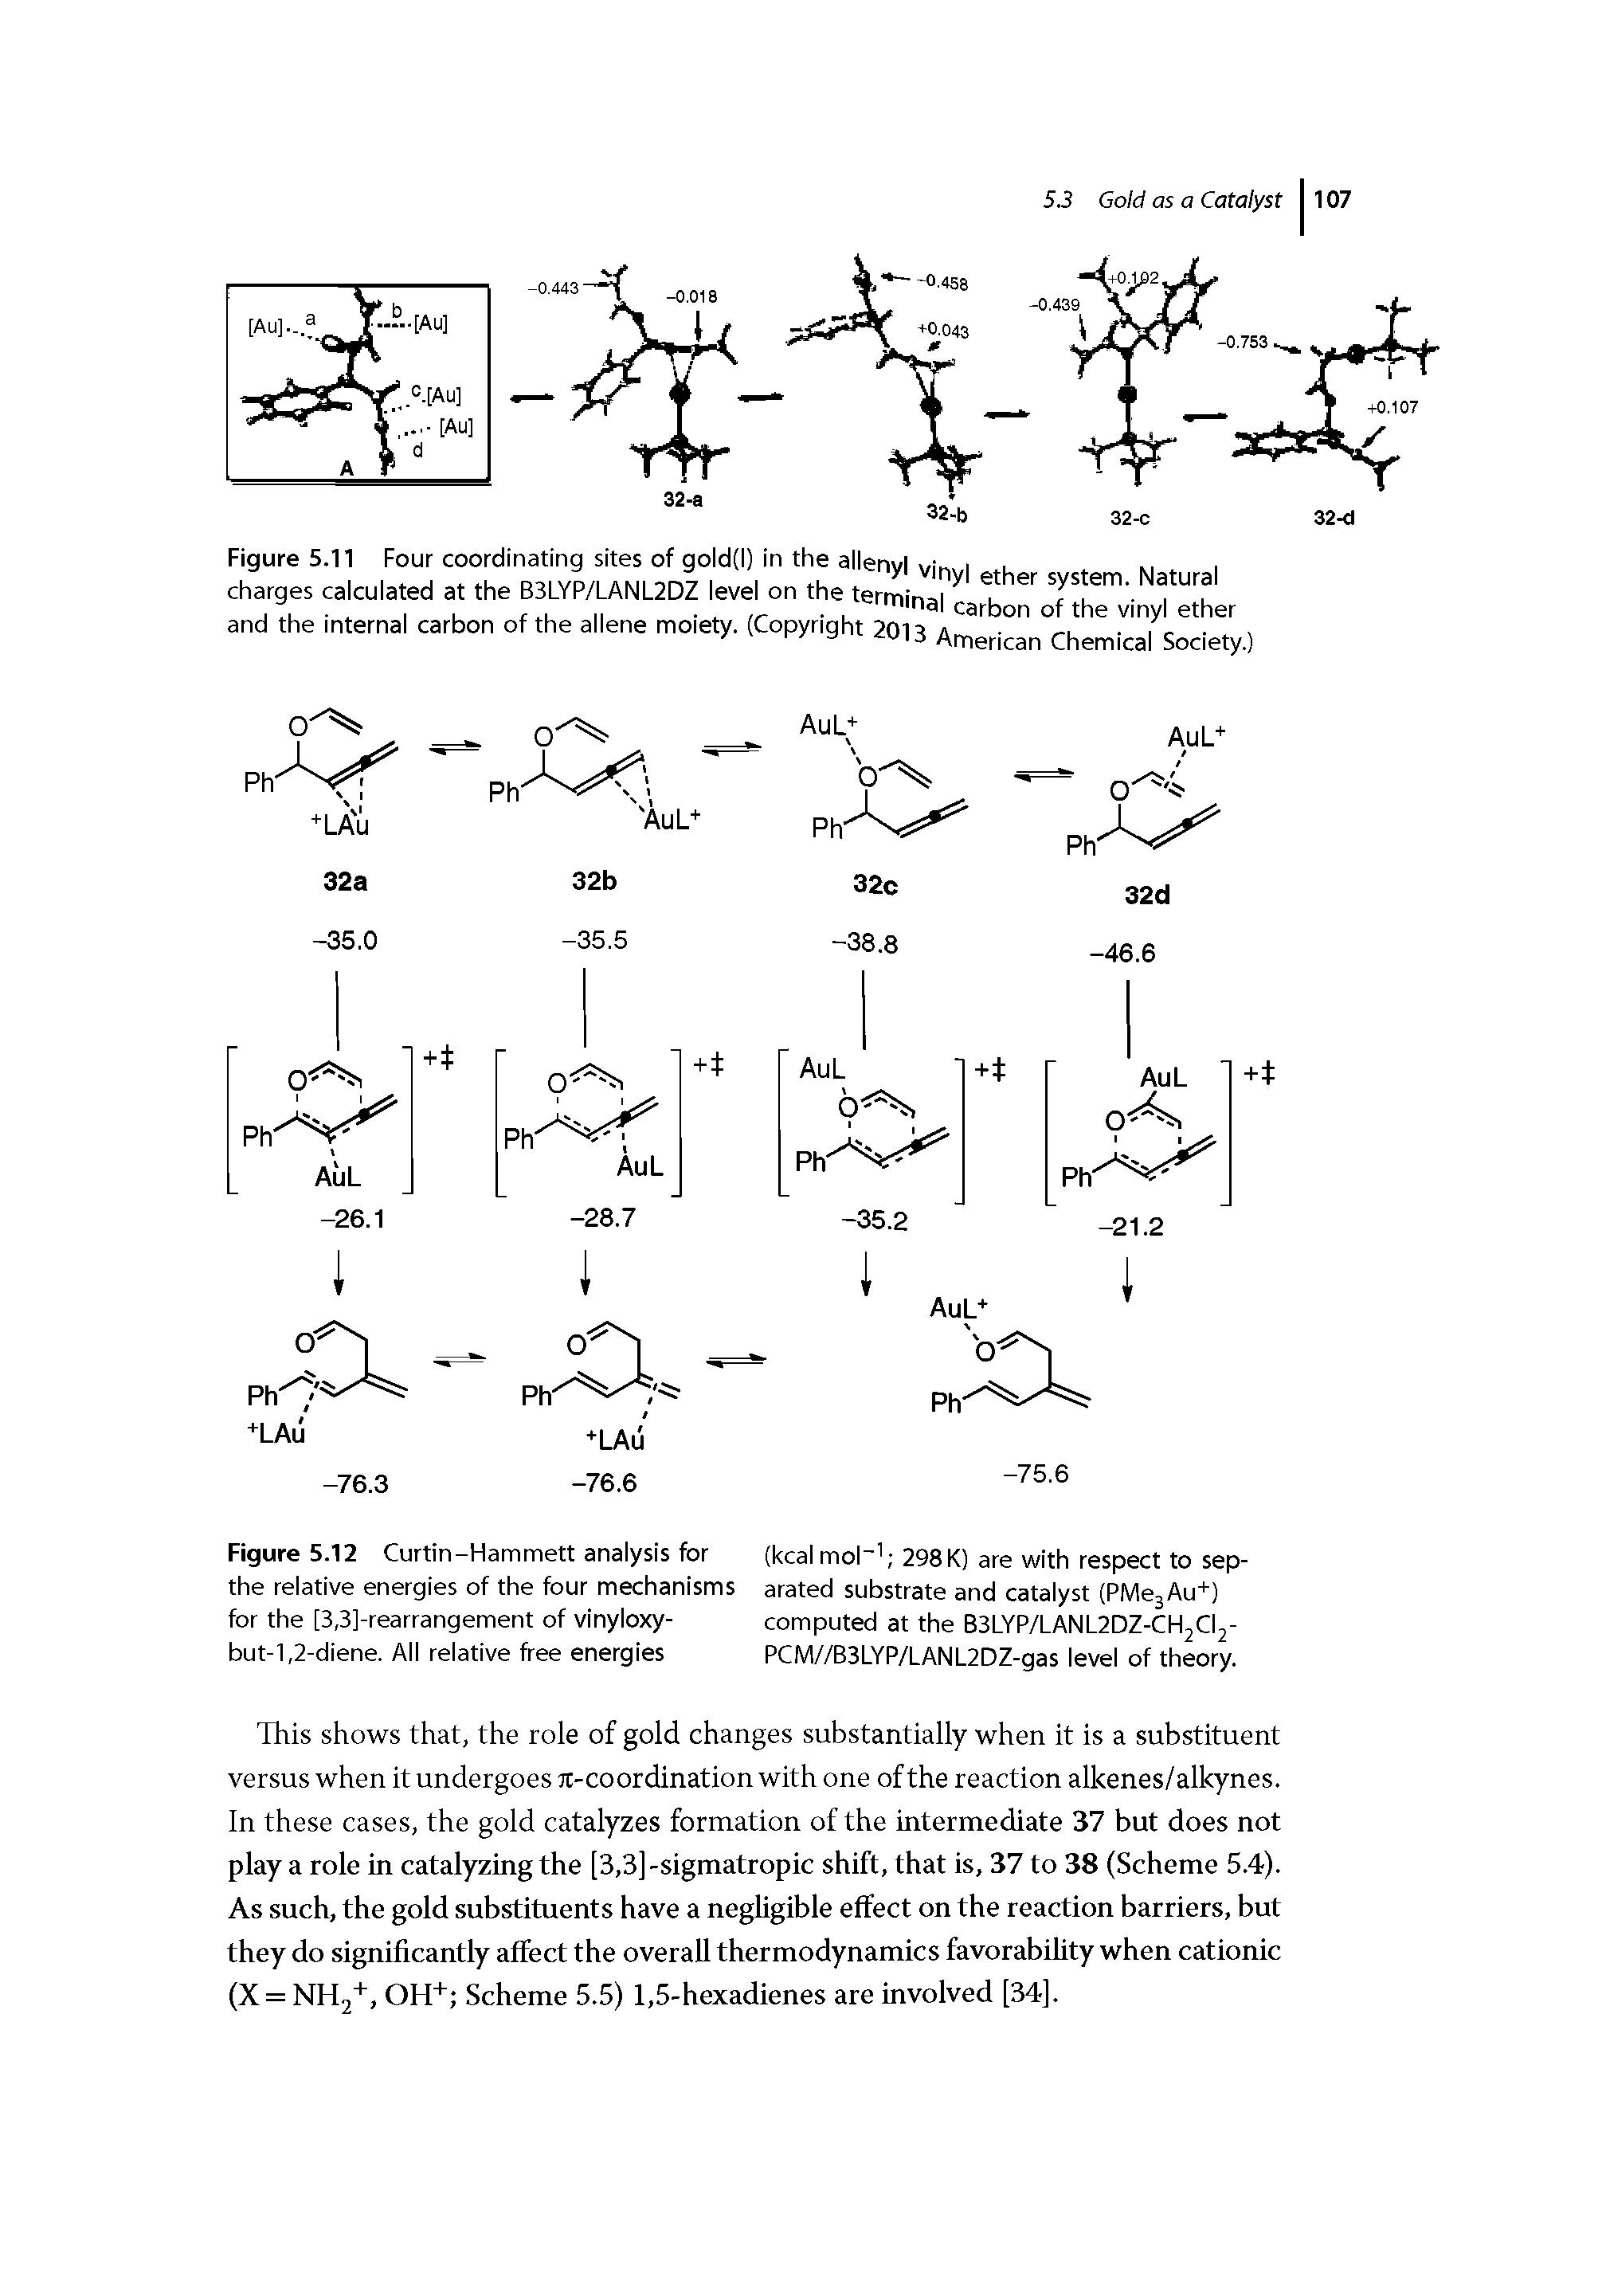 Figure 5.12 Curtin-Hammett analysis for (kcalmoh 298K) are with respect to sep-the relative energies of the four mechanisms arated substrate and catalyst (PMejAu+) for the [3,3]-rearrangement of vinyloxy- computed at the B3LYP/LANL2DZ-CH2CI2-...